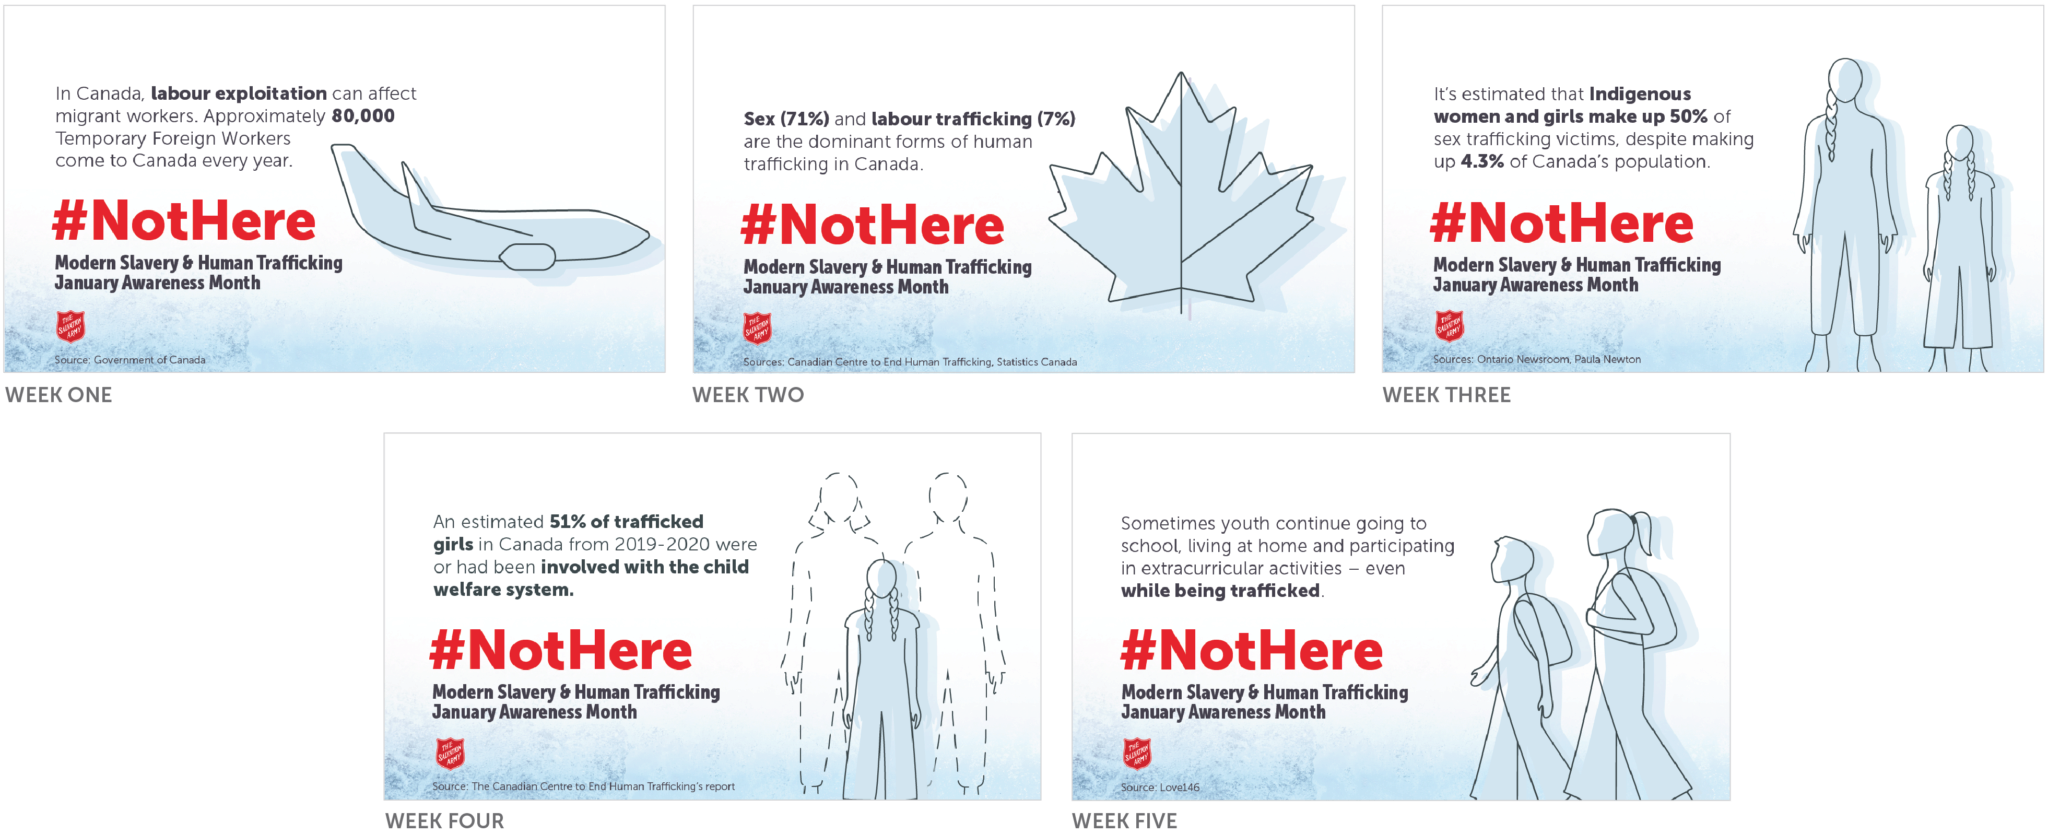 Social Media Assets with statistics / trends about MSHT in Canada. From left to right – an airplane, a maple left, an Indigenous woman and girl, a young girl standing in front of two adults, a boy and girl walking.